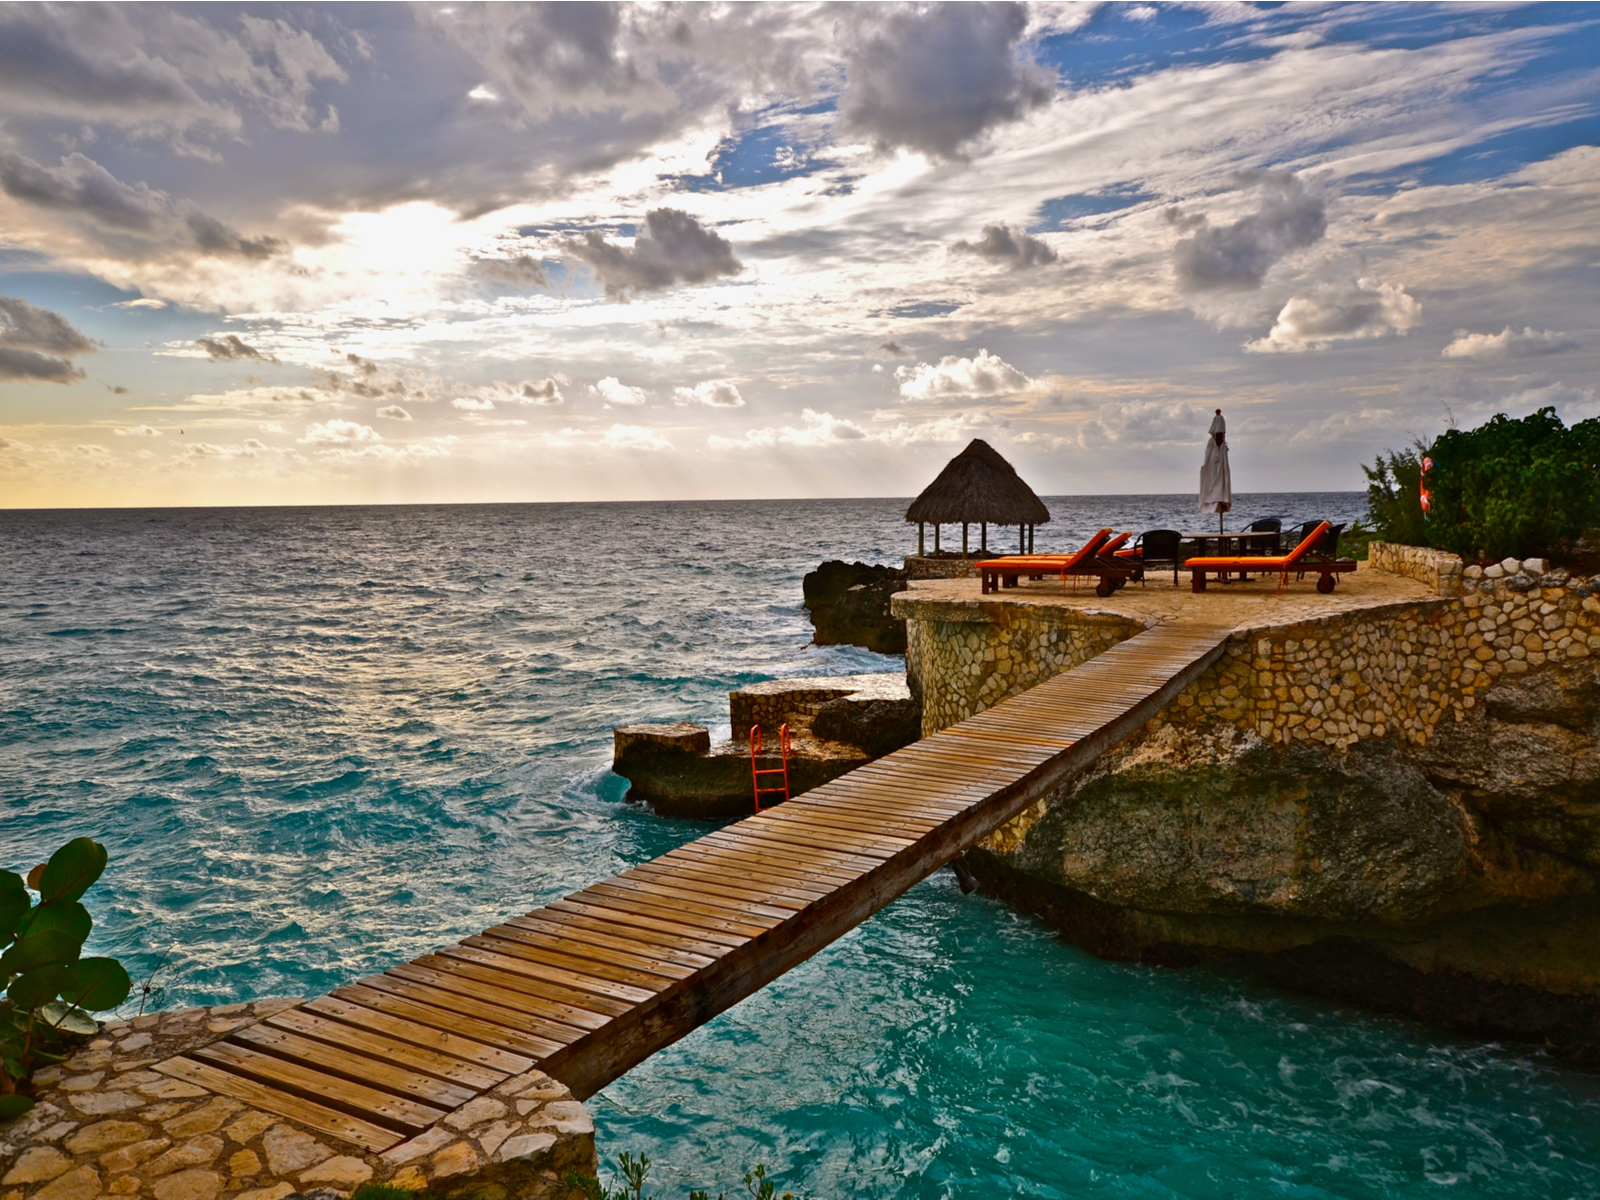 Gorgeous view of a wooden footbridge above the ocean for a piece on the best time to visit Jamaica